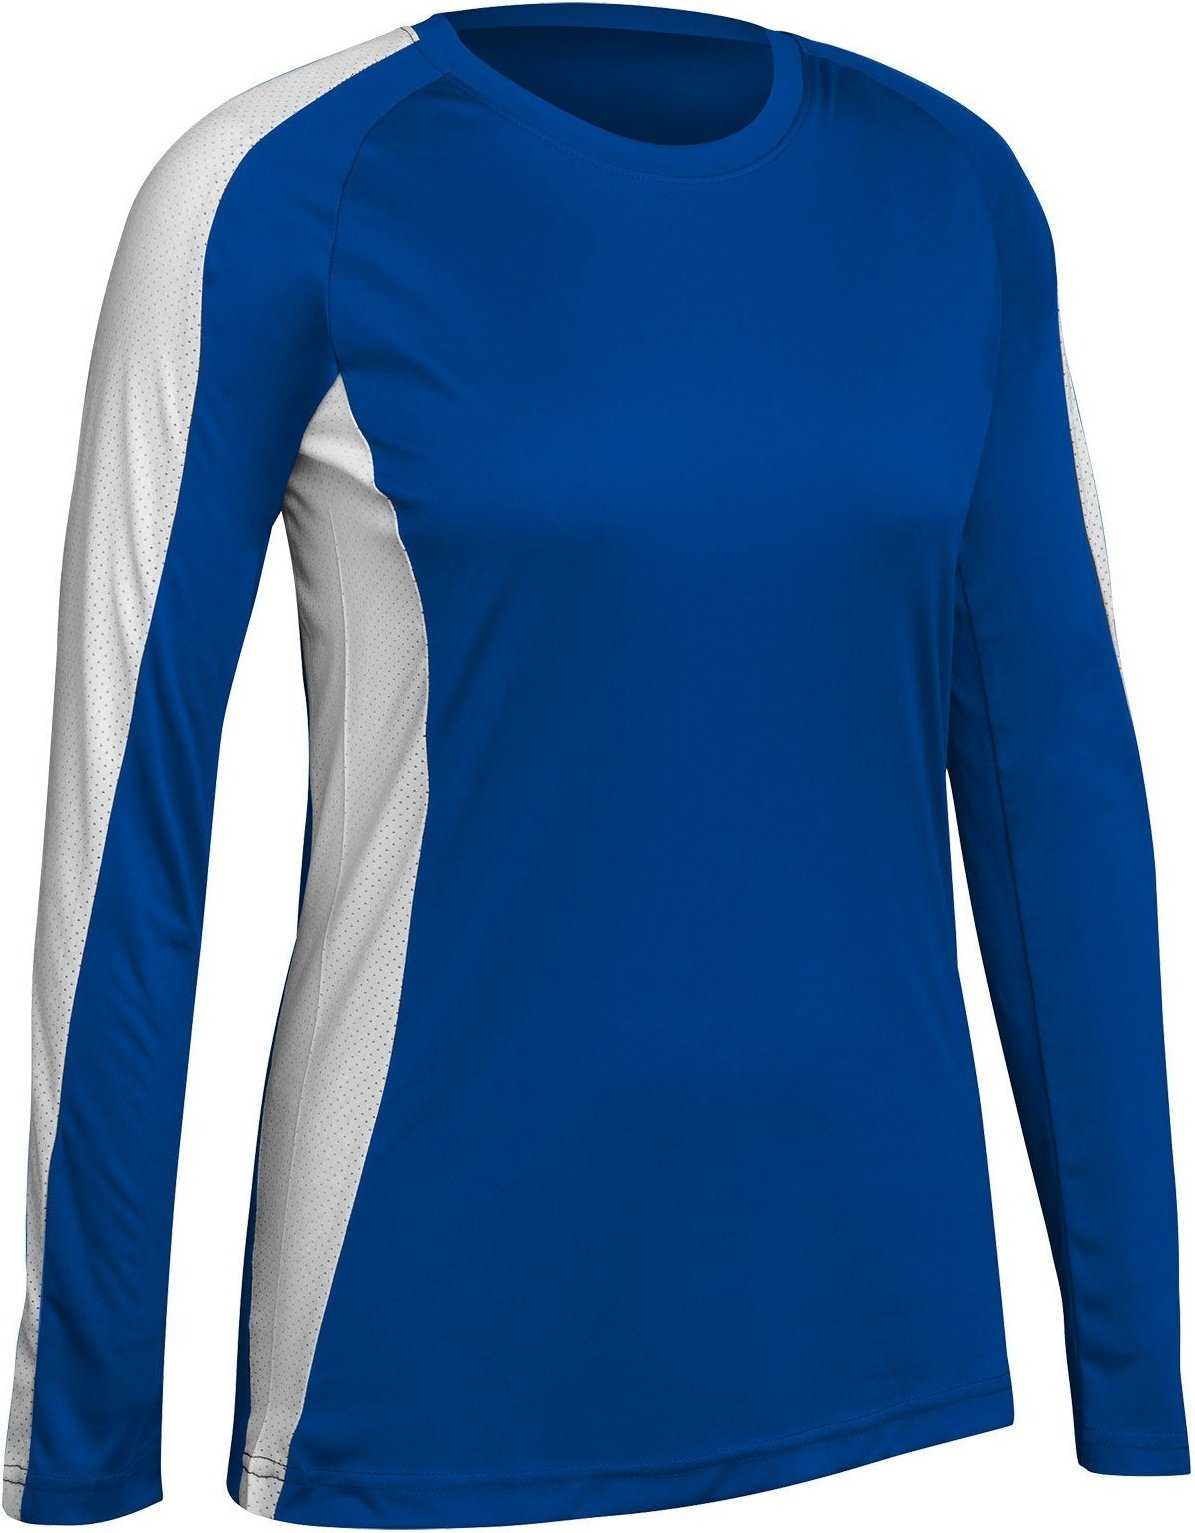 Champro VJ8 Triumphant Ladies Long Sleeve Volleyball Jersey - Royal Wh